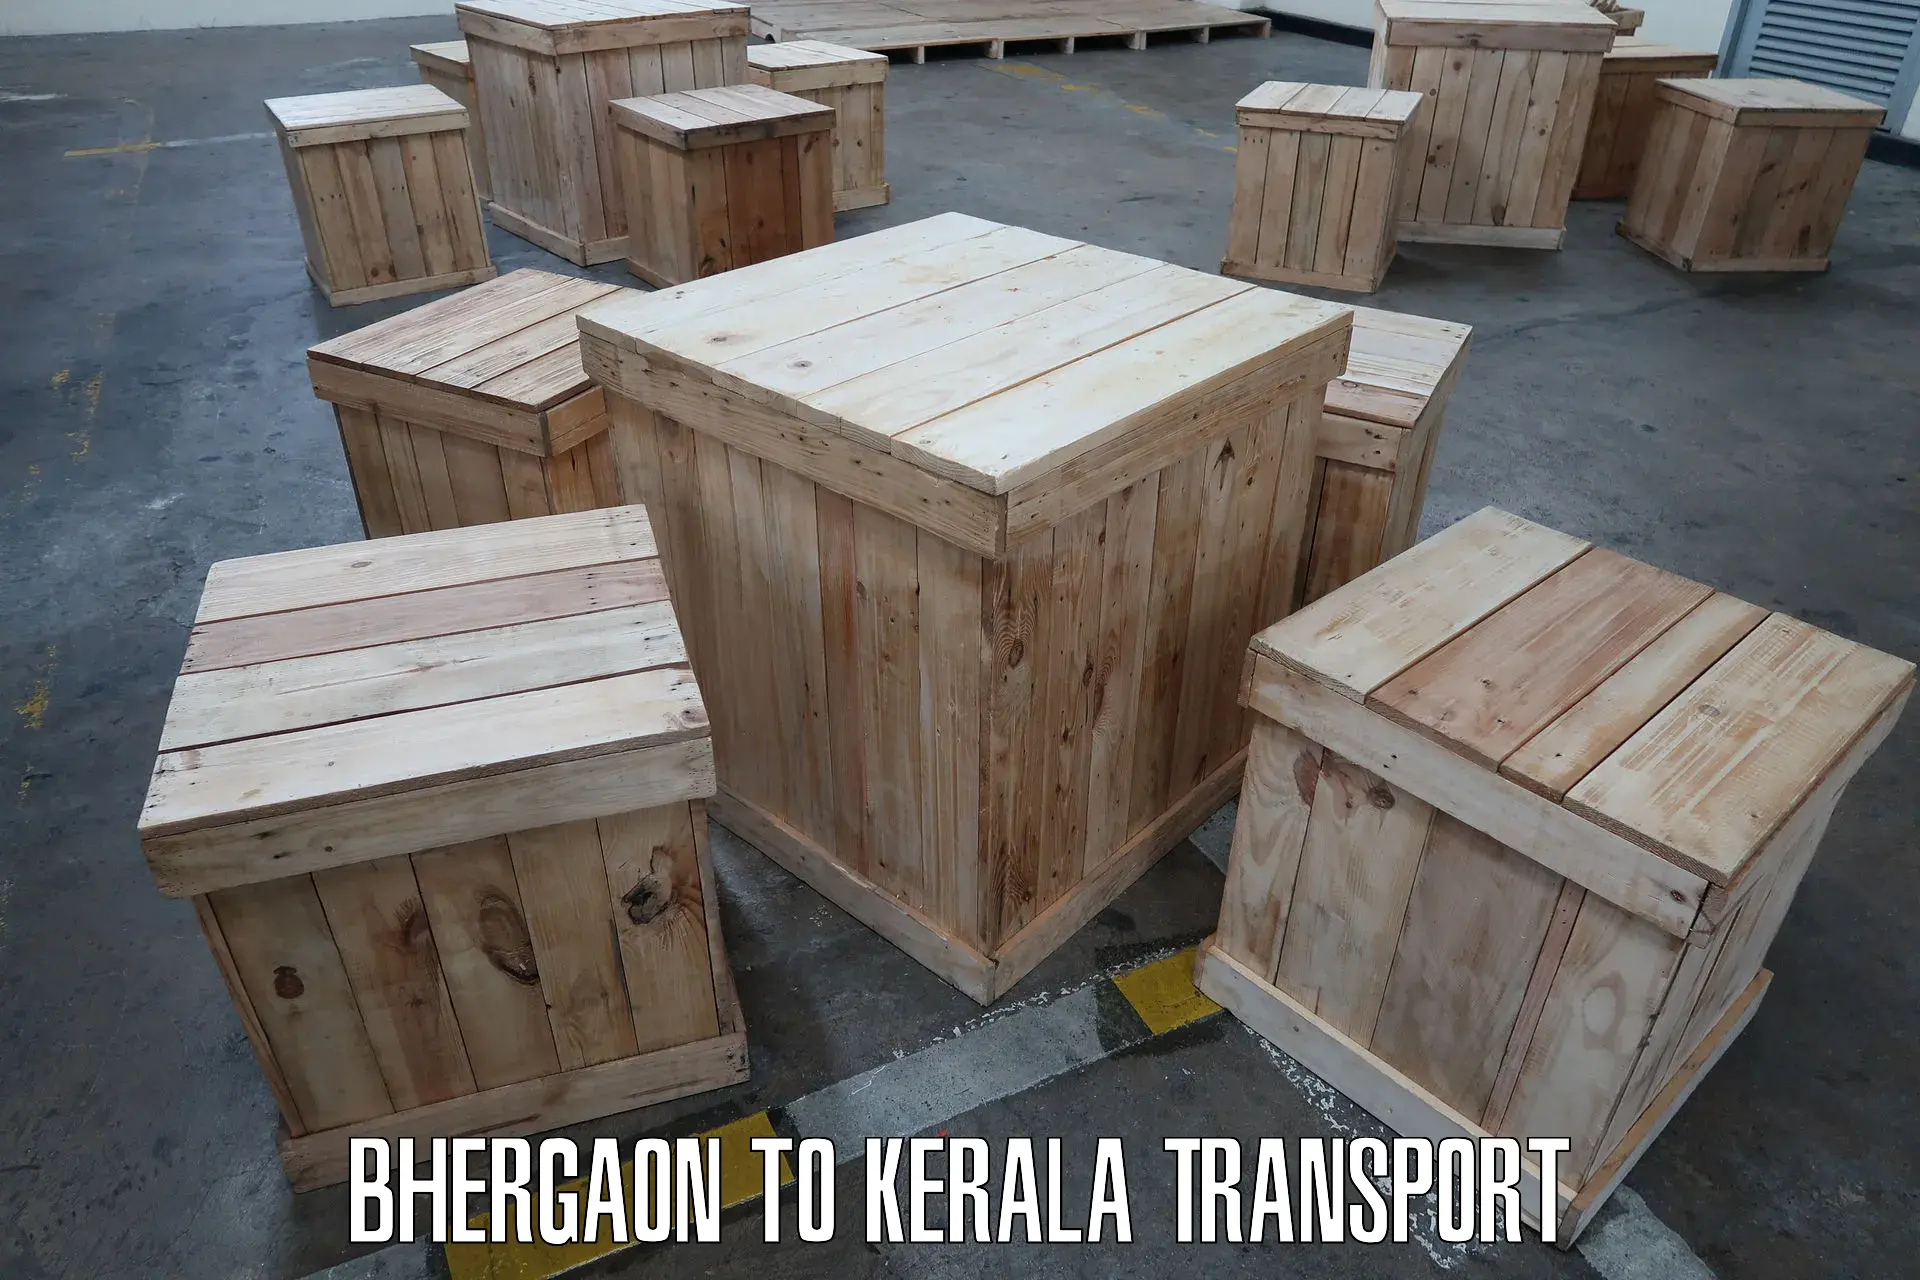 Nearby transport service Bhergaon to Chalakudy